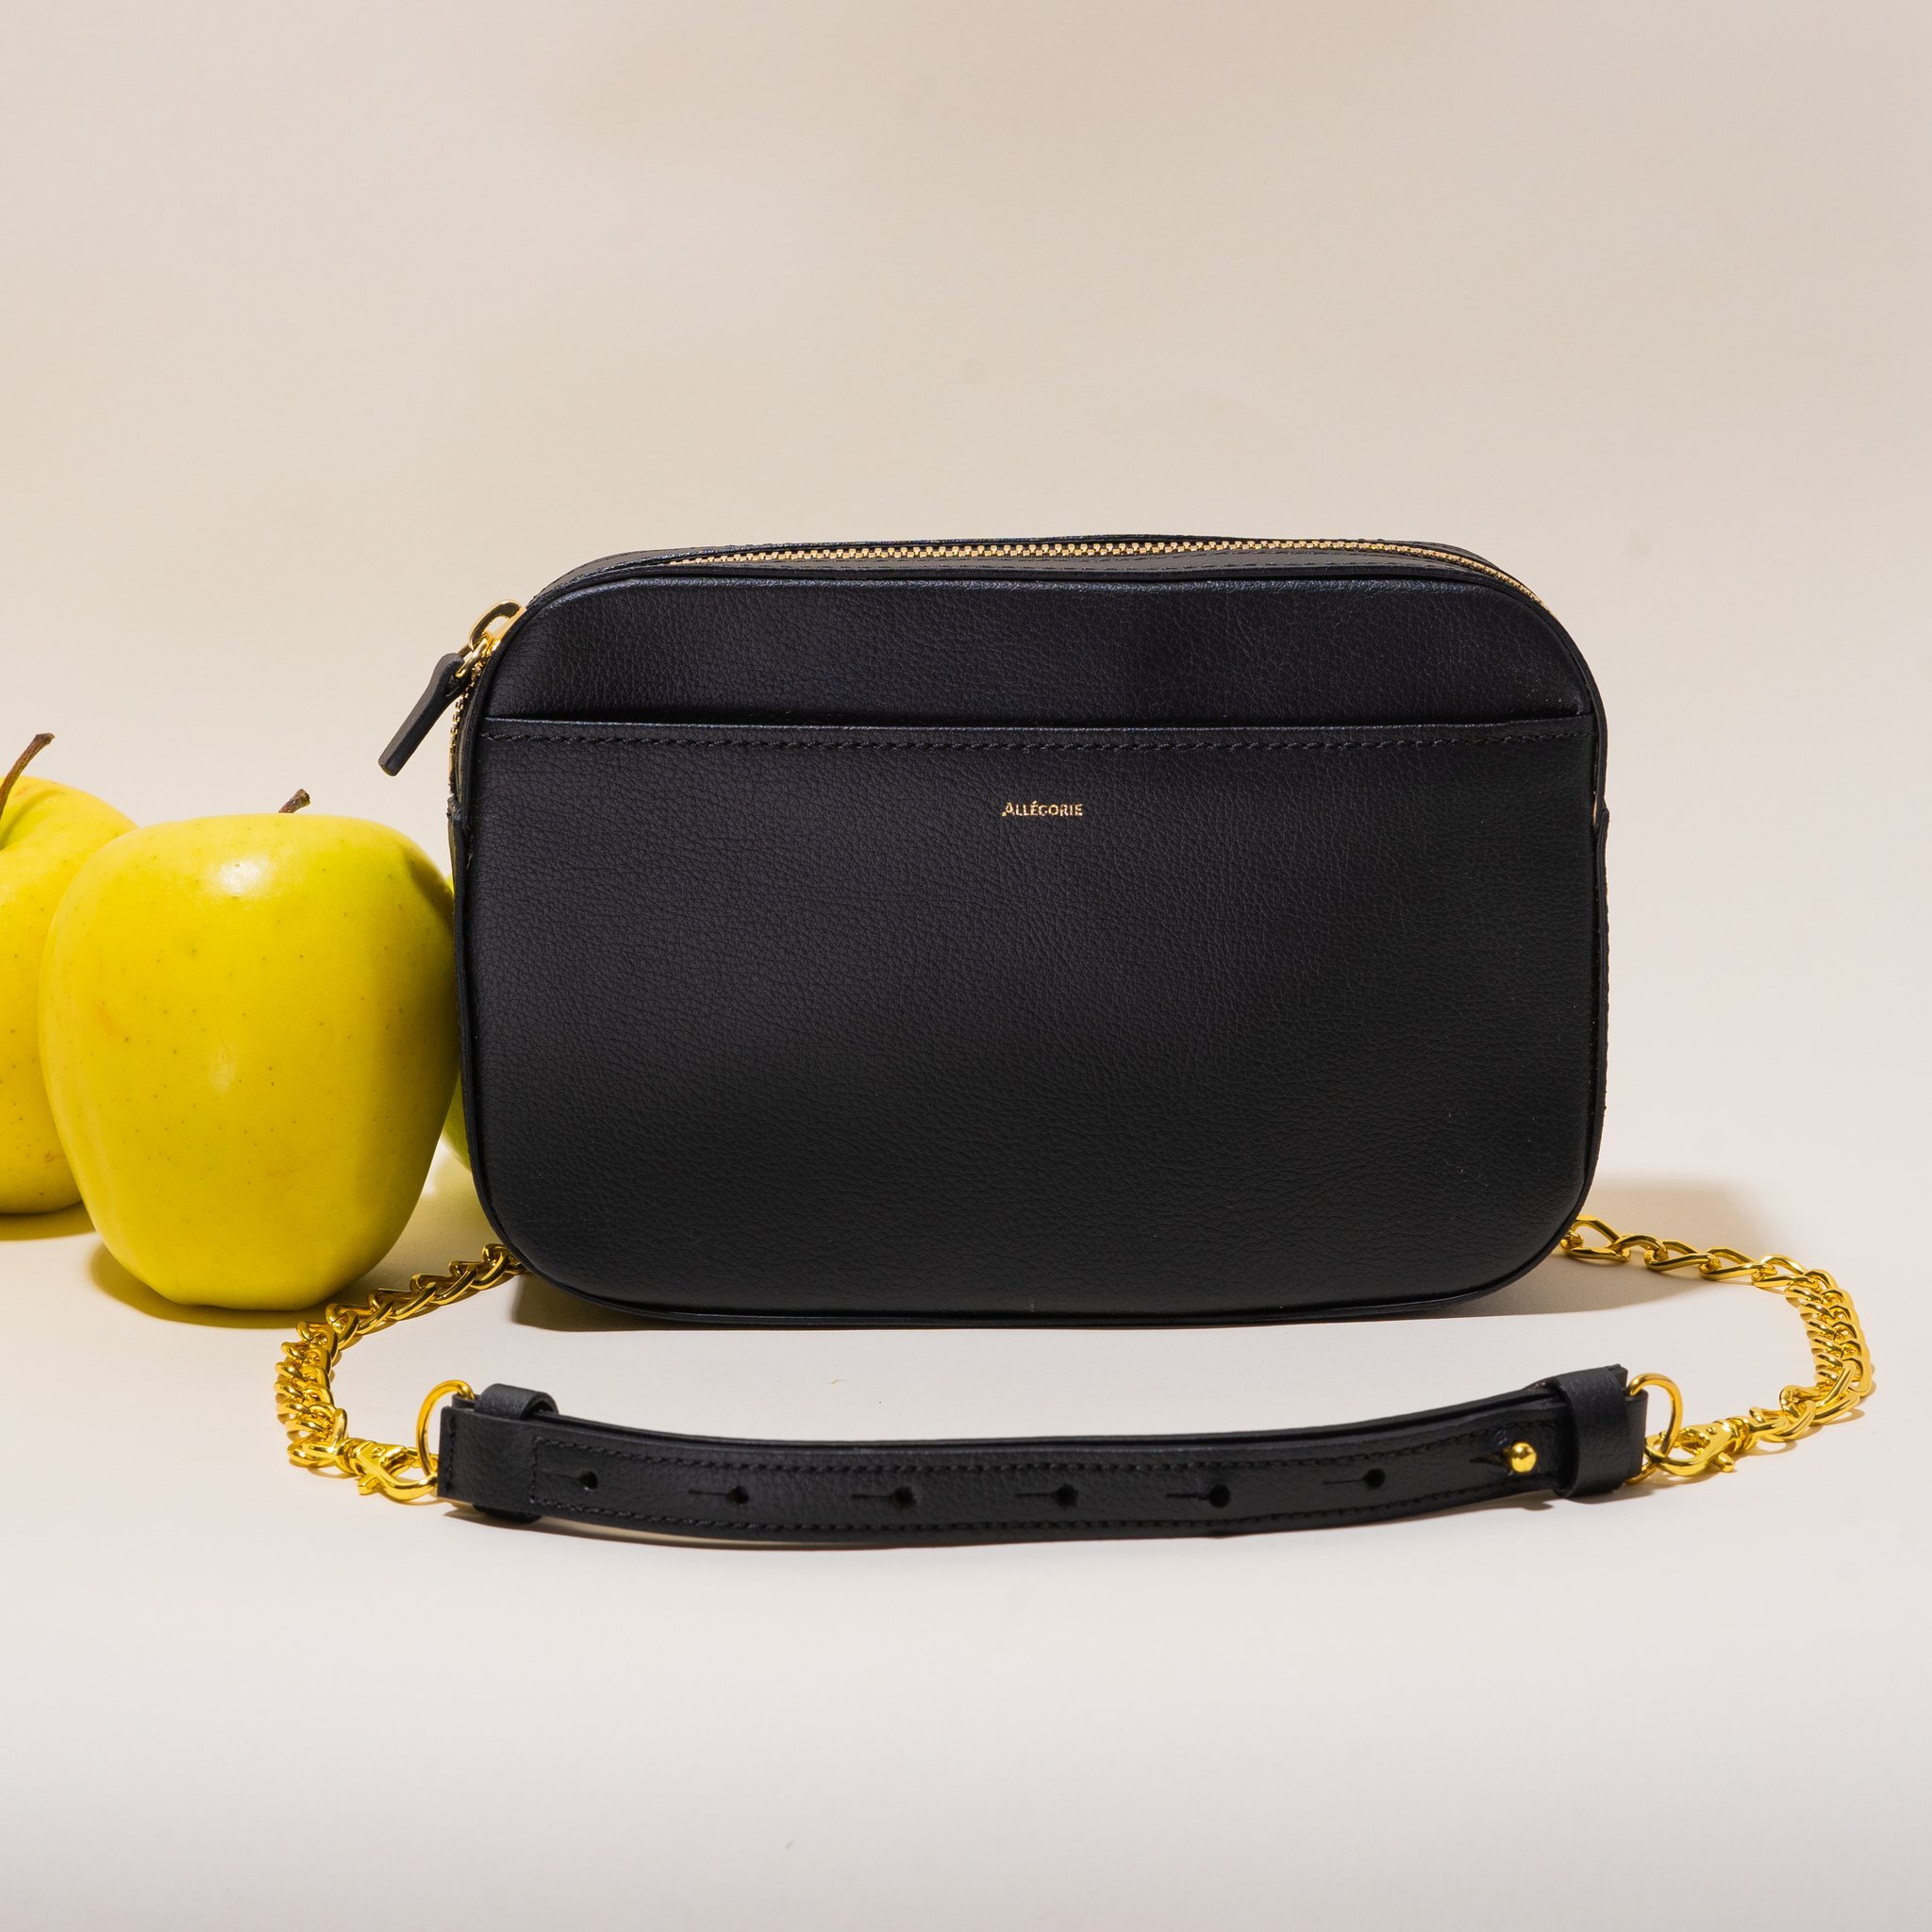 Matt + Nat Makes Vegan Leather Handbags From Apple Waste for the First Time